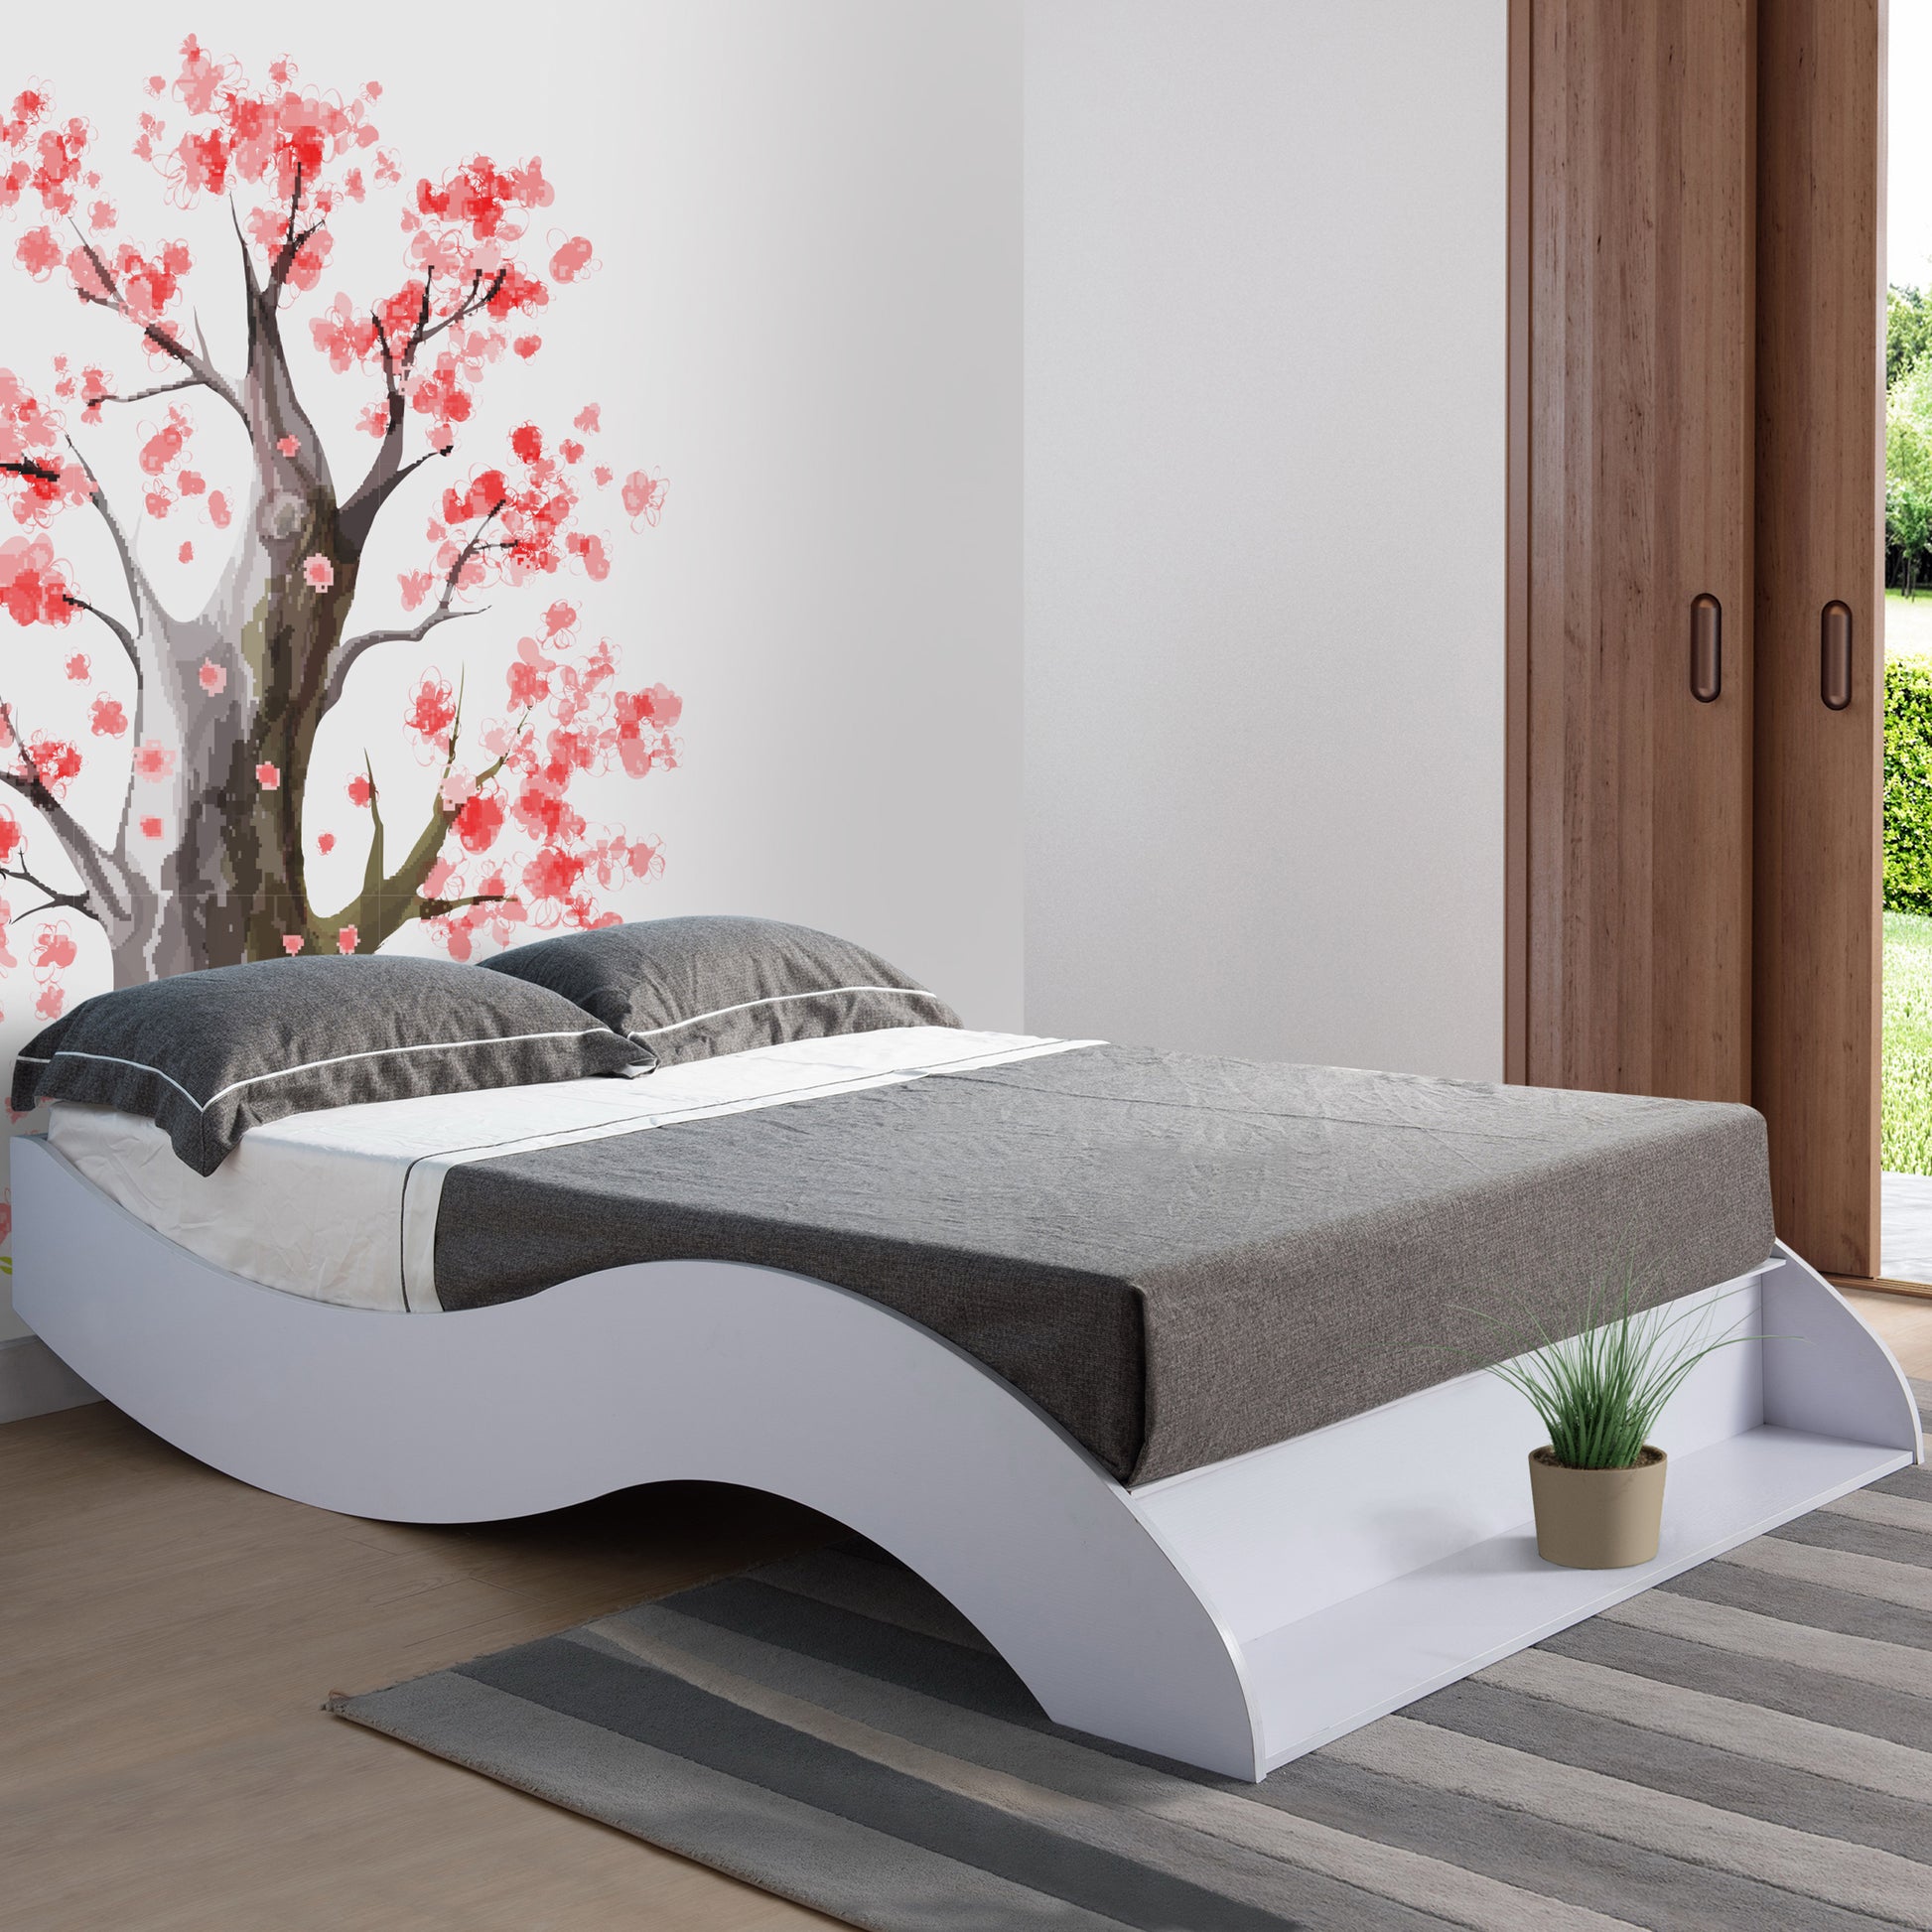 Right angled contemporary white curvy queen platform bed in a bedroom with accessories